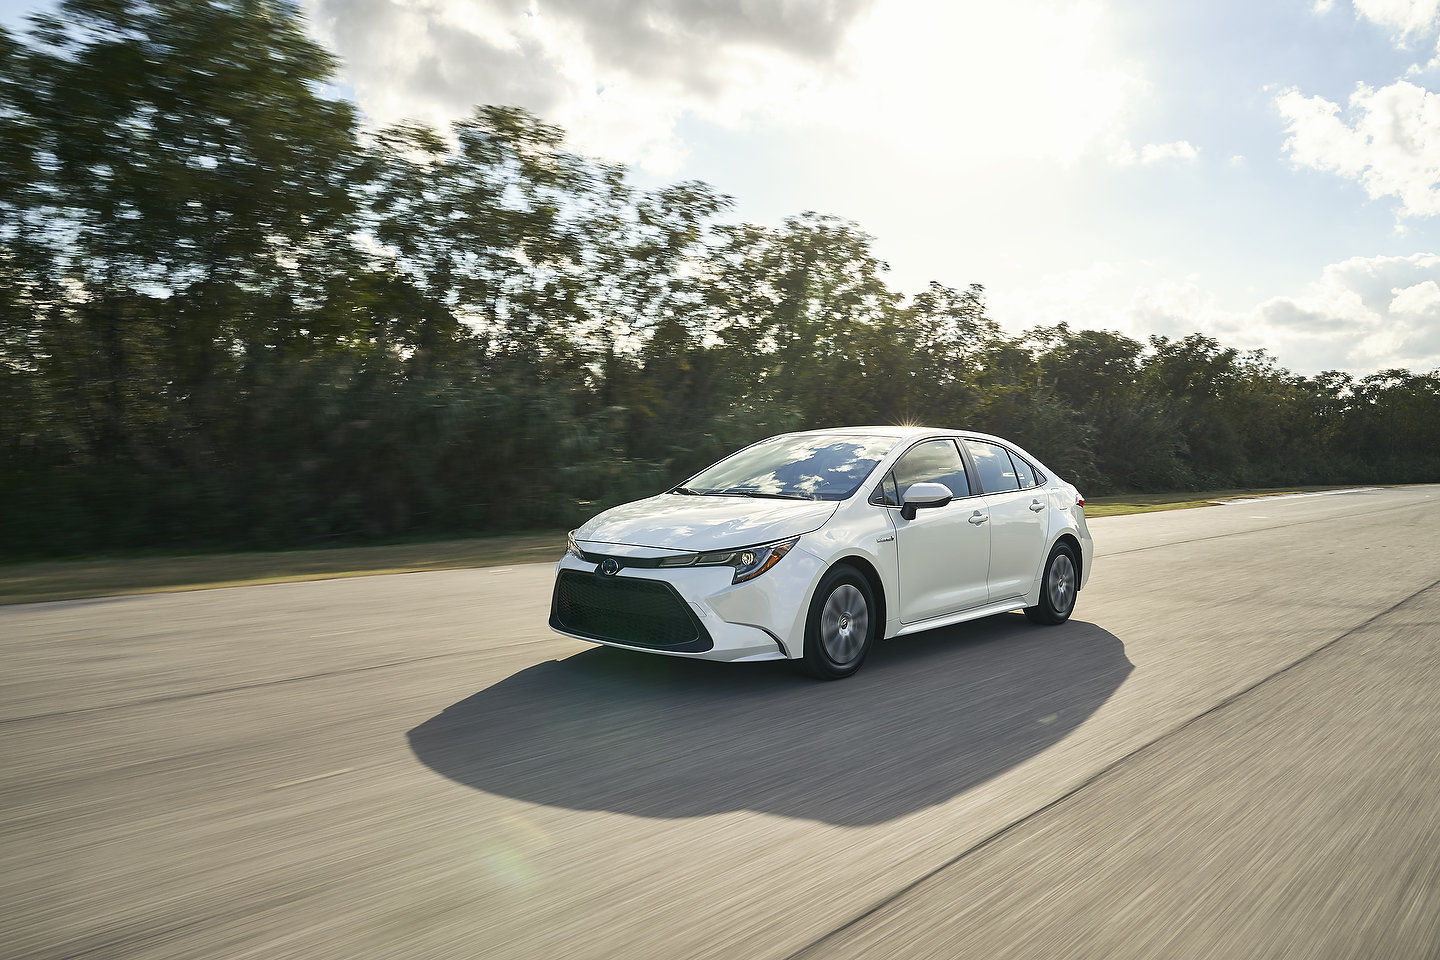 2020 Toyota Corolla Hybrid: Get Ready for Millions More on the Road